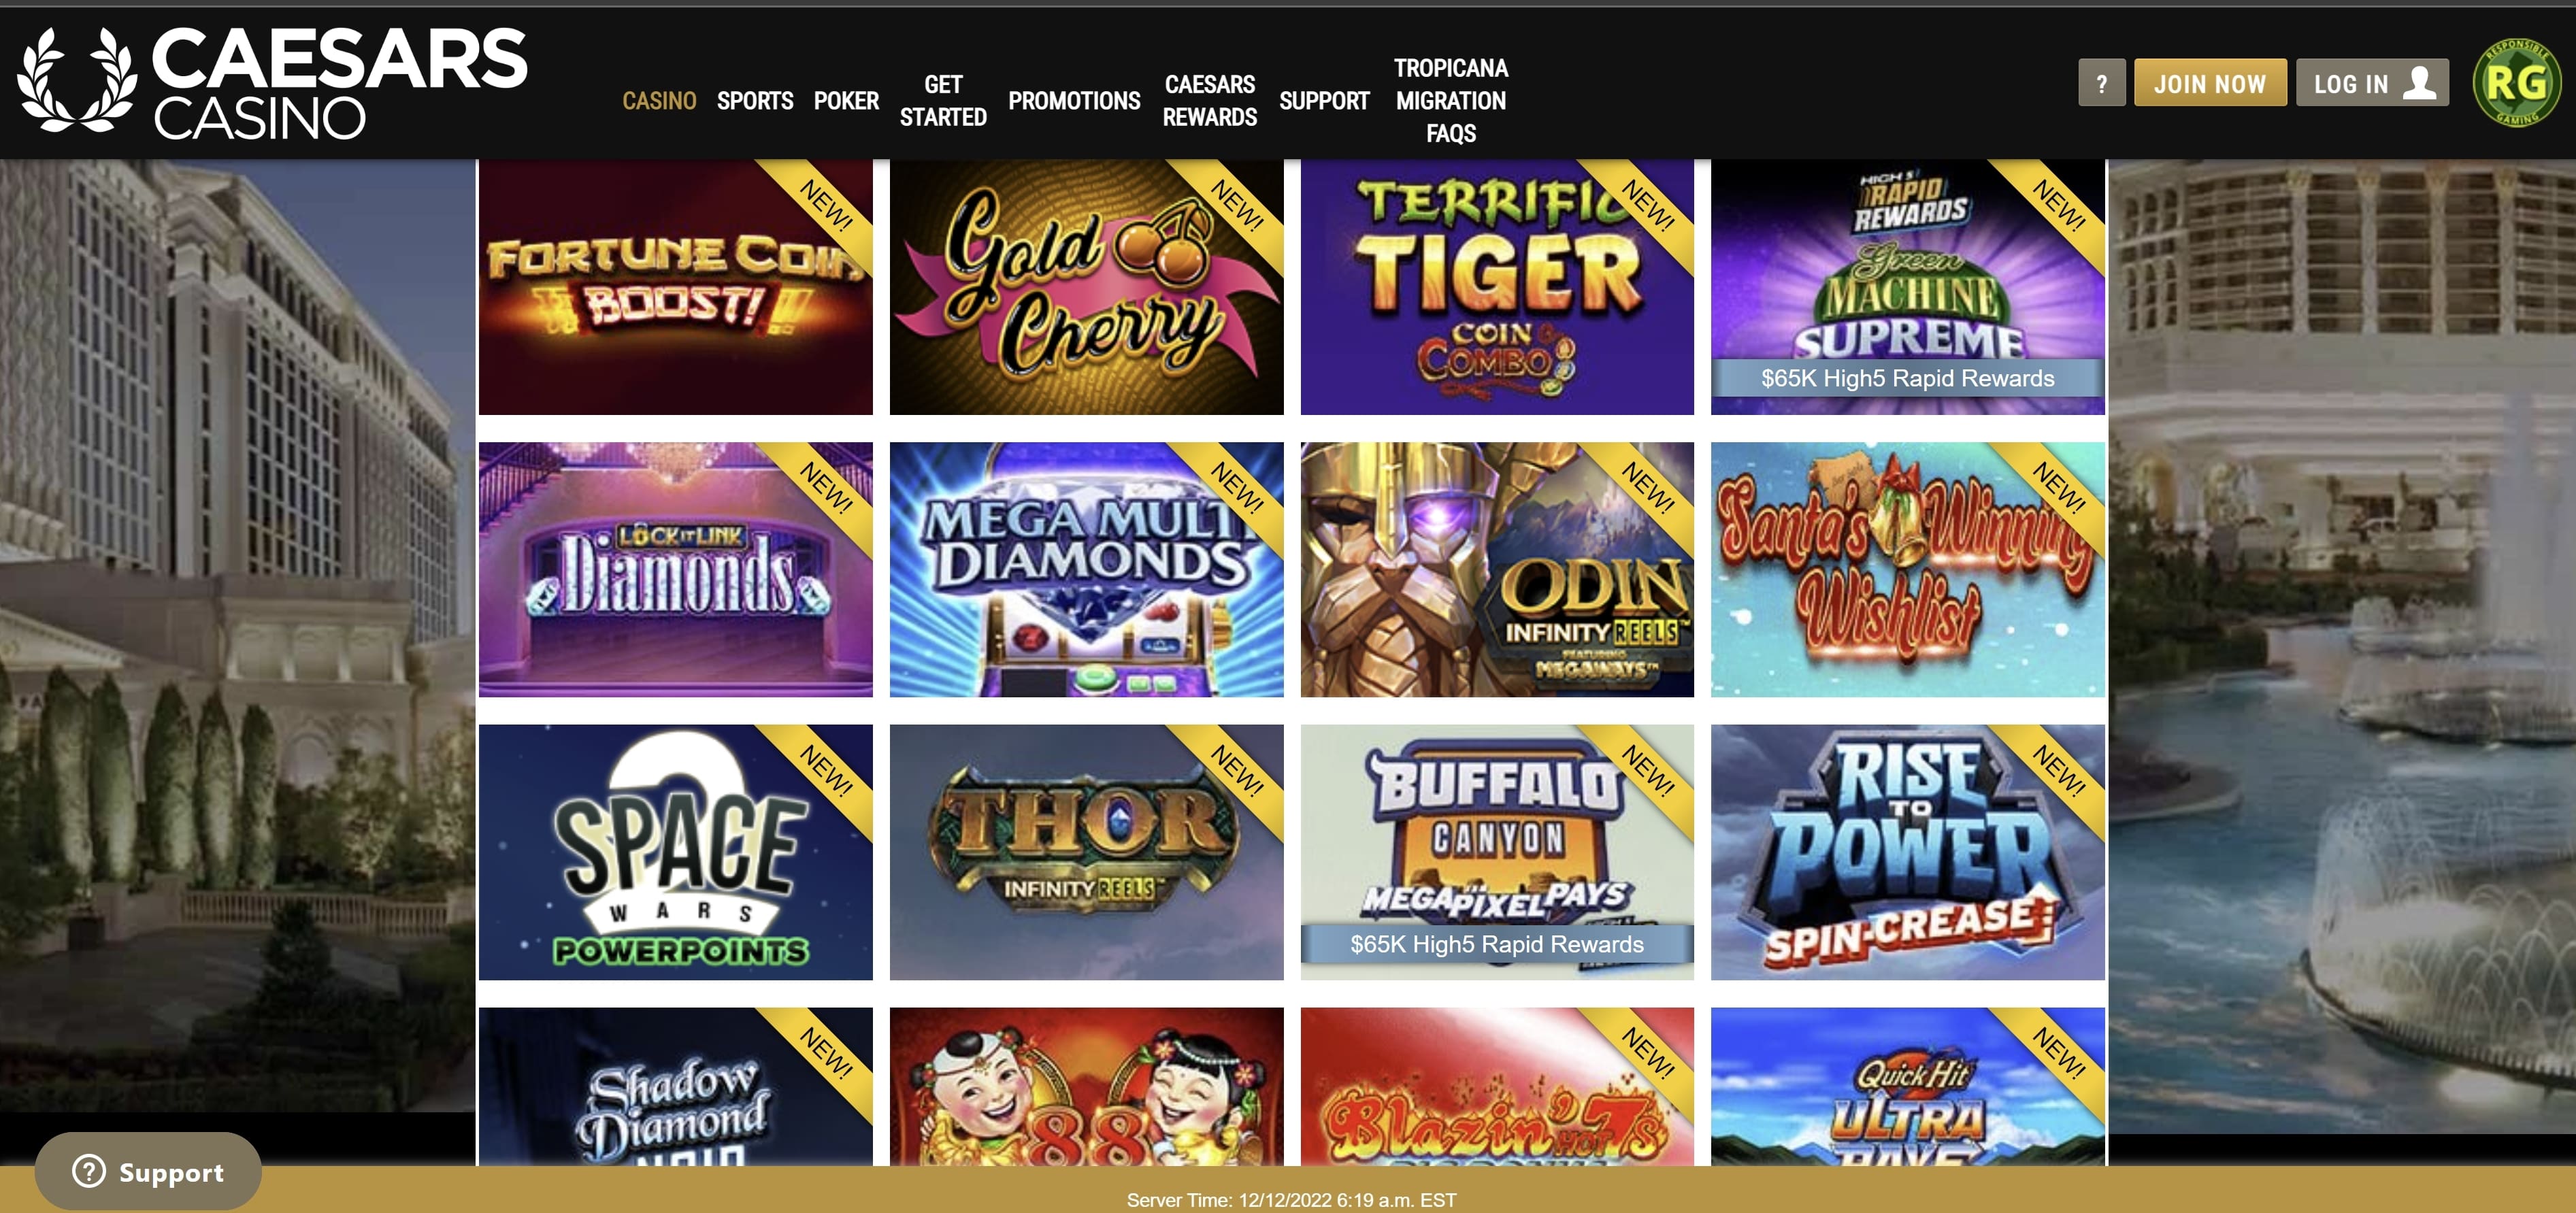 The image shows the game lobby for Caesars online casino.